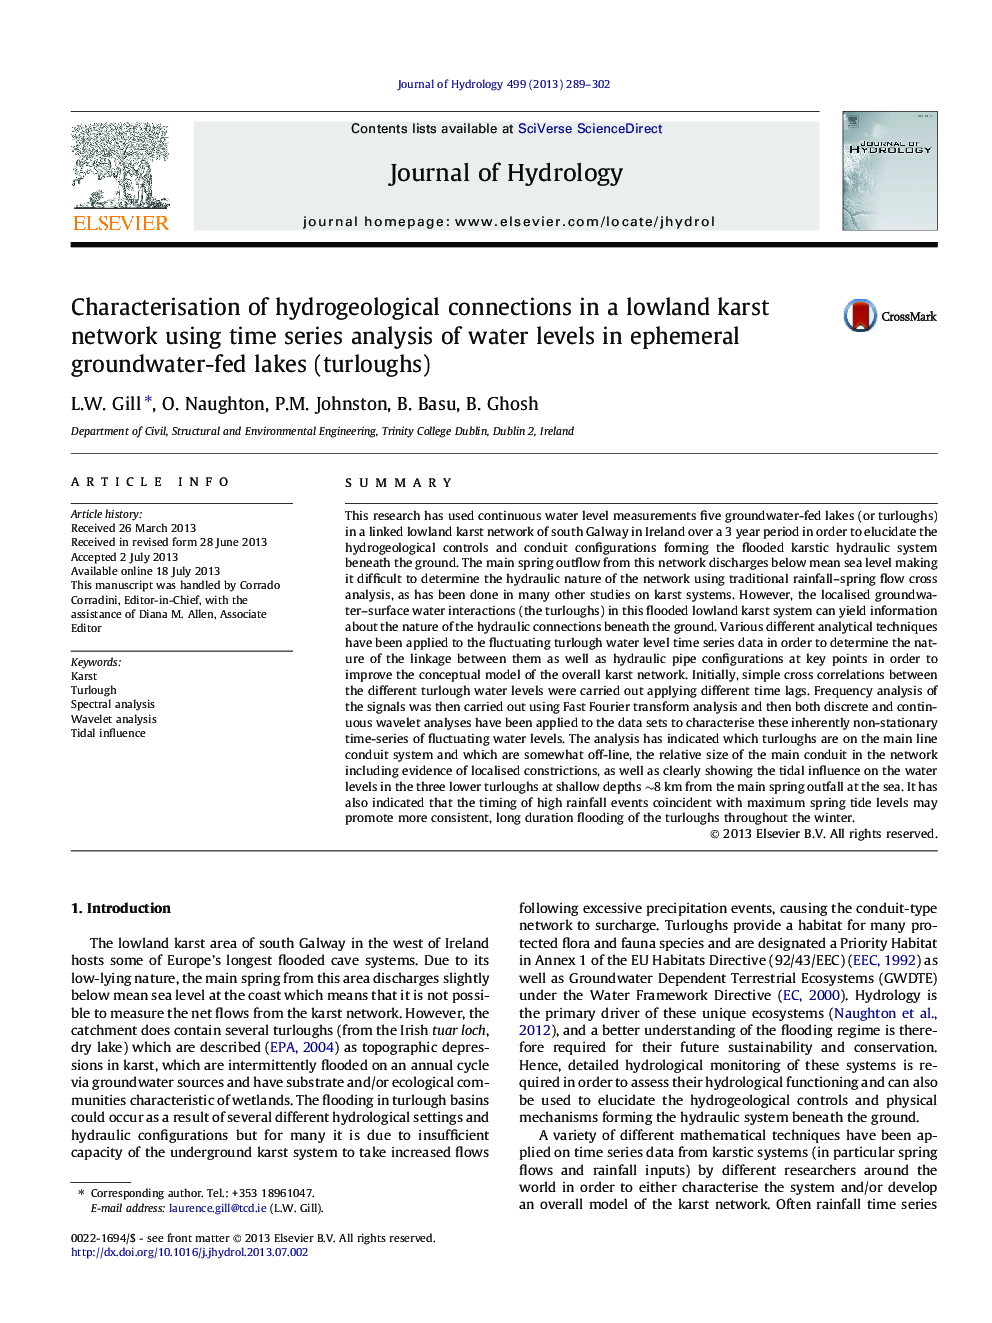 Characterisation of hydrogeological connections in a lowland karst network using time series analysis of water levels in ephemeral groundwater-fed lakes (turloughs)